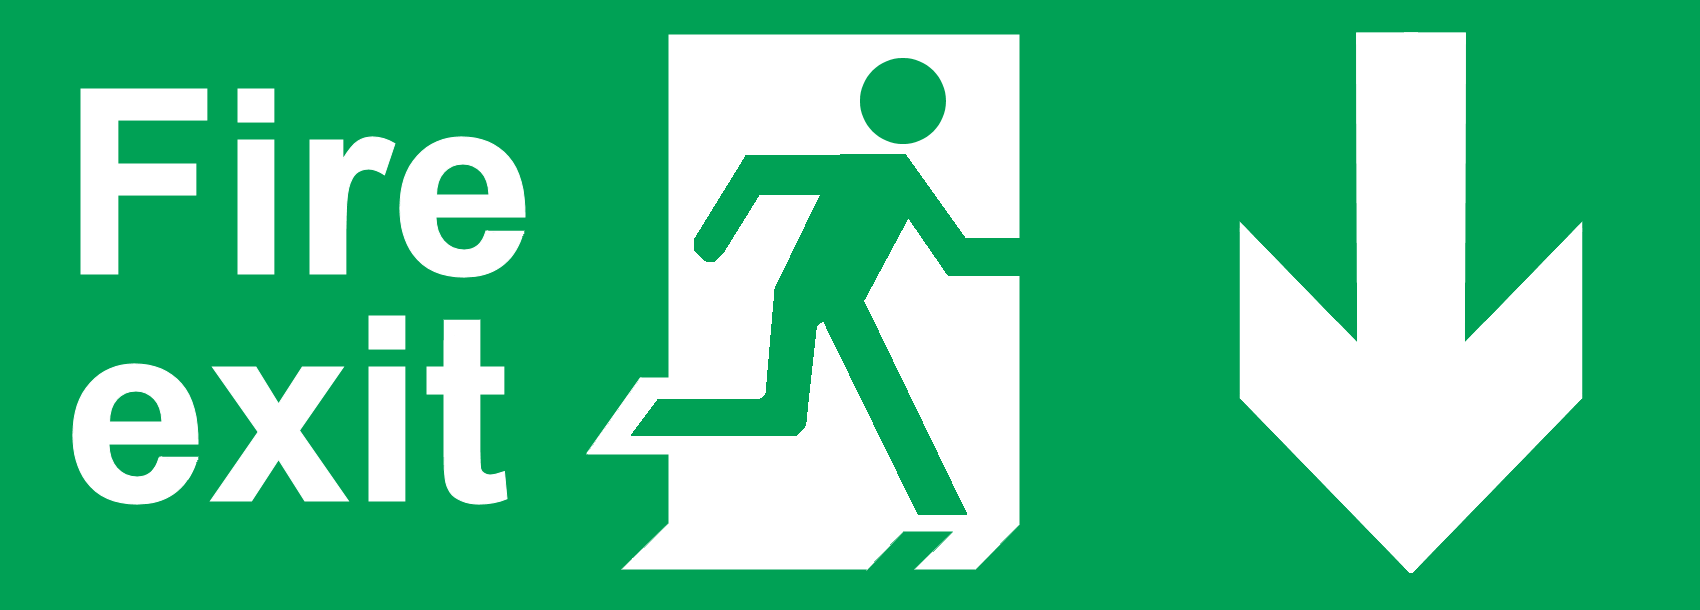 health-safety-sign-fire-exit-keep-clear-other-public-safety-equipment-public-safety-staff